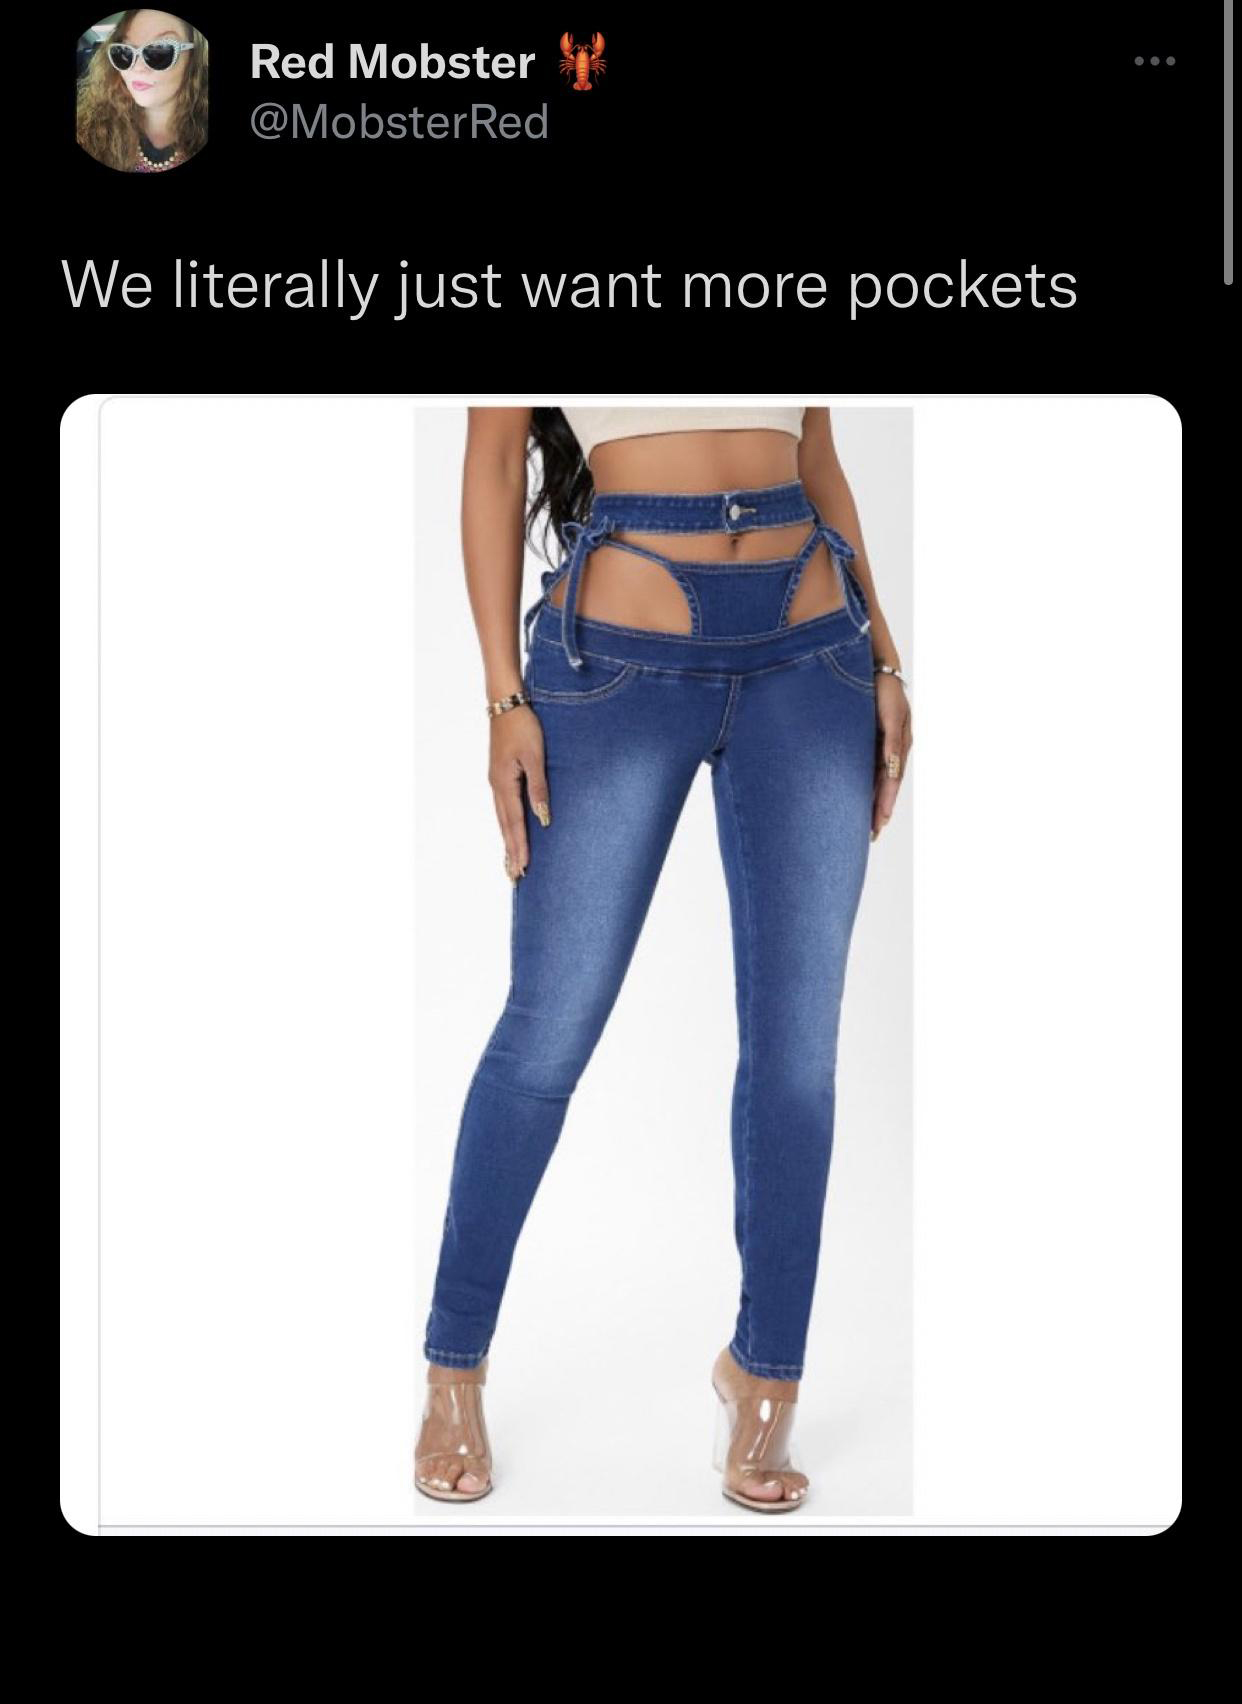 shein sxy jeans - Red Mobster sy Red We literally just want more pockets